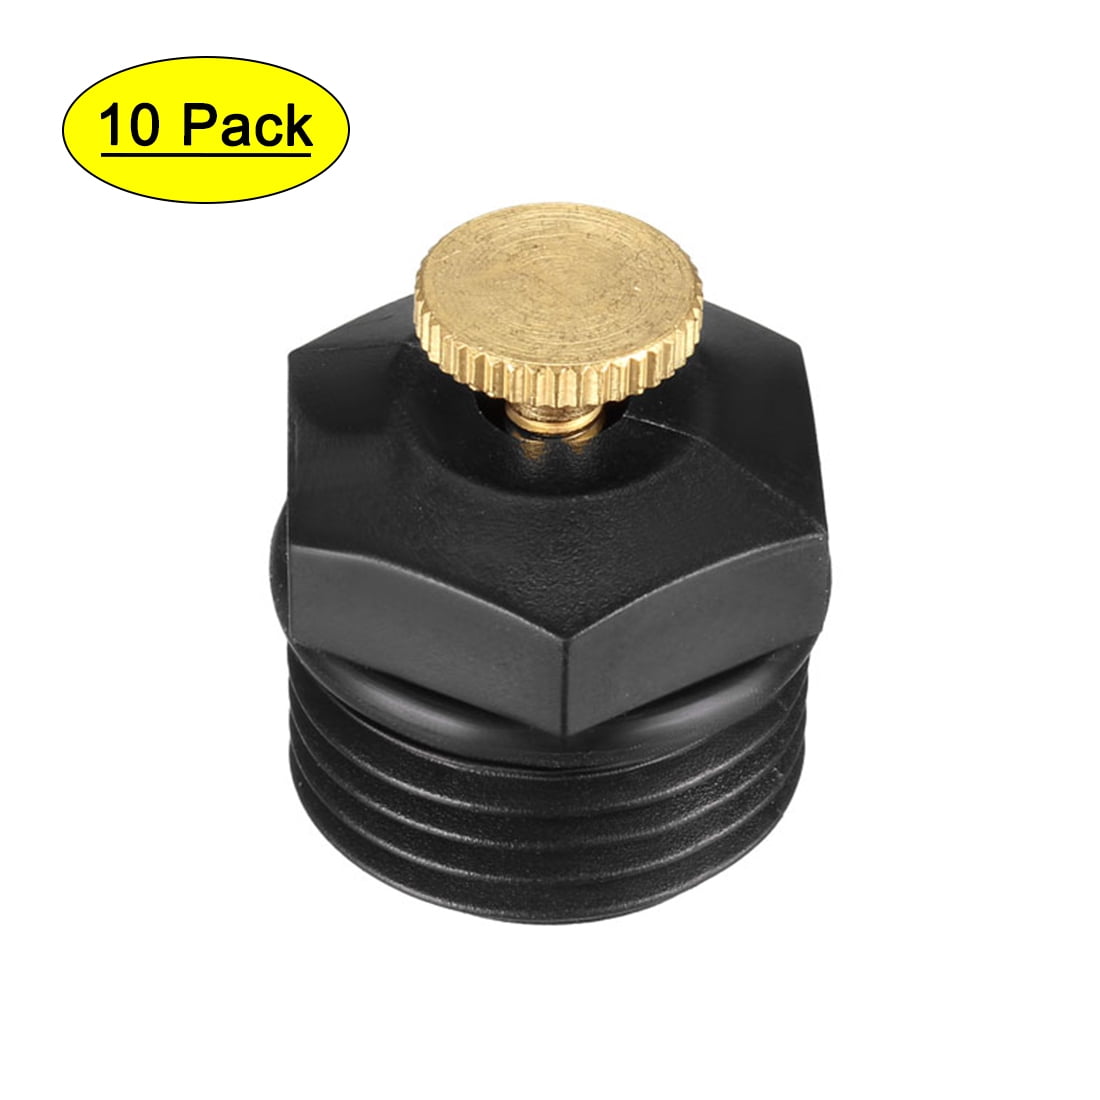 Details about   5x 1/2" Adjustable Spray Nozzle Atomizing Lawn Misting Sprinkler Patio Gardening 